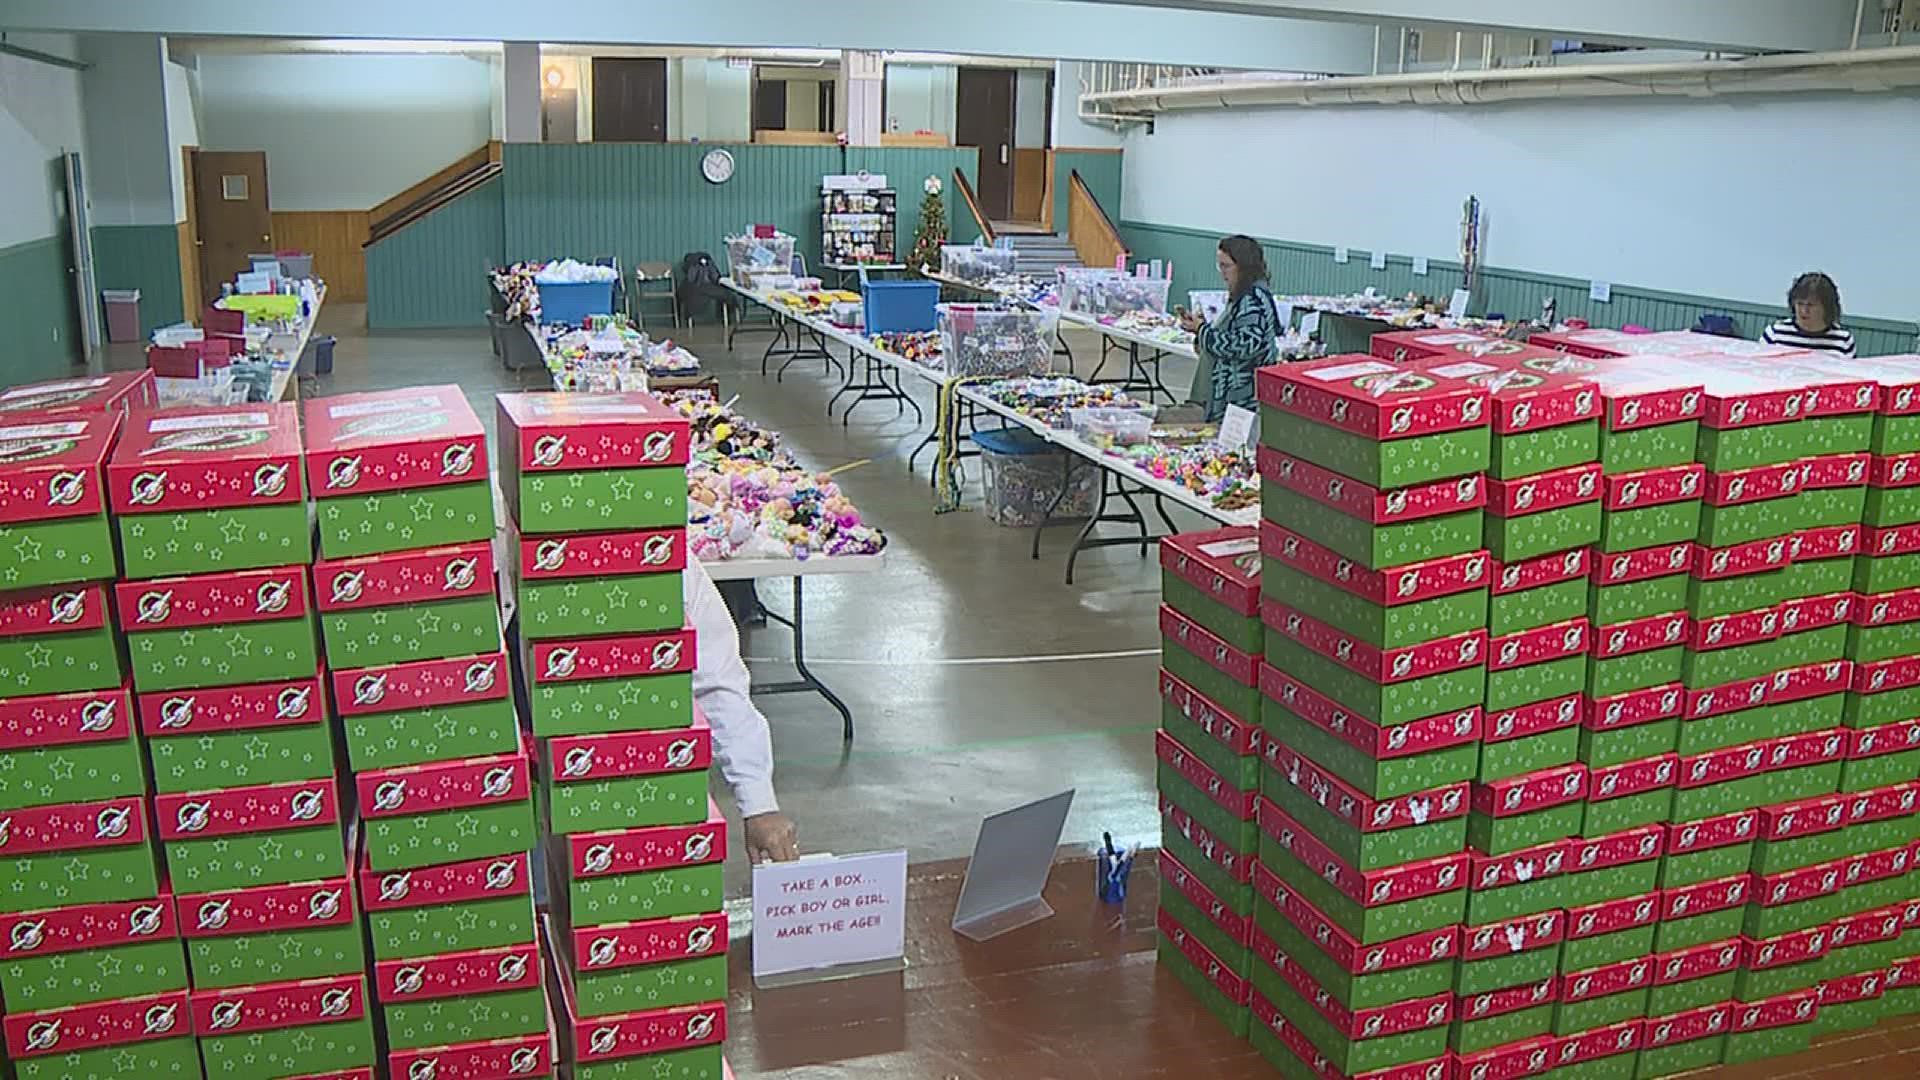 The project is called Operation Christmas Child which includes packing a number of items into shoeboxes before being shipped to children in poor countries.